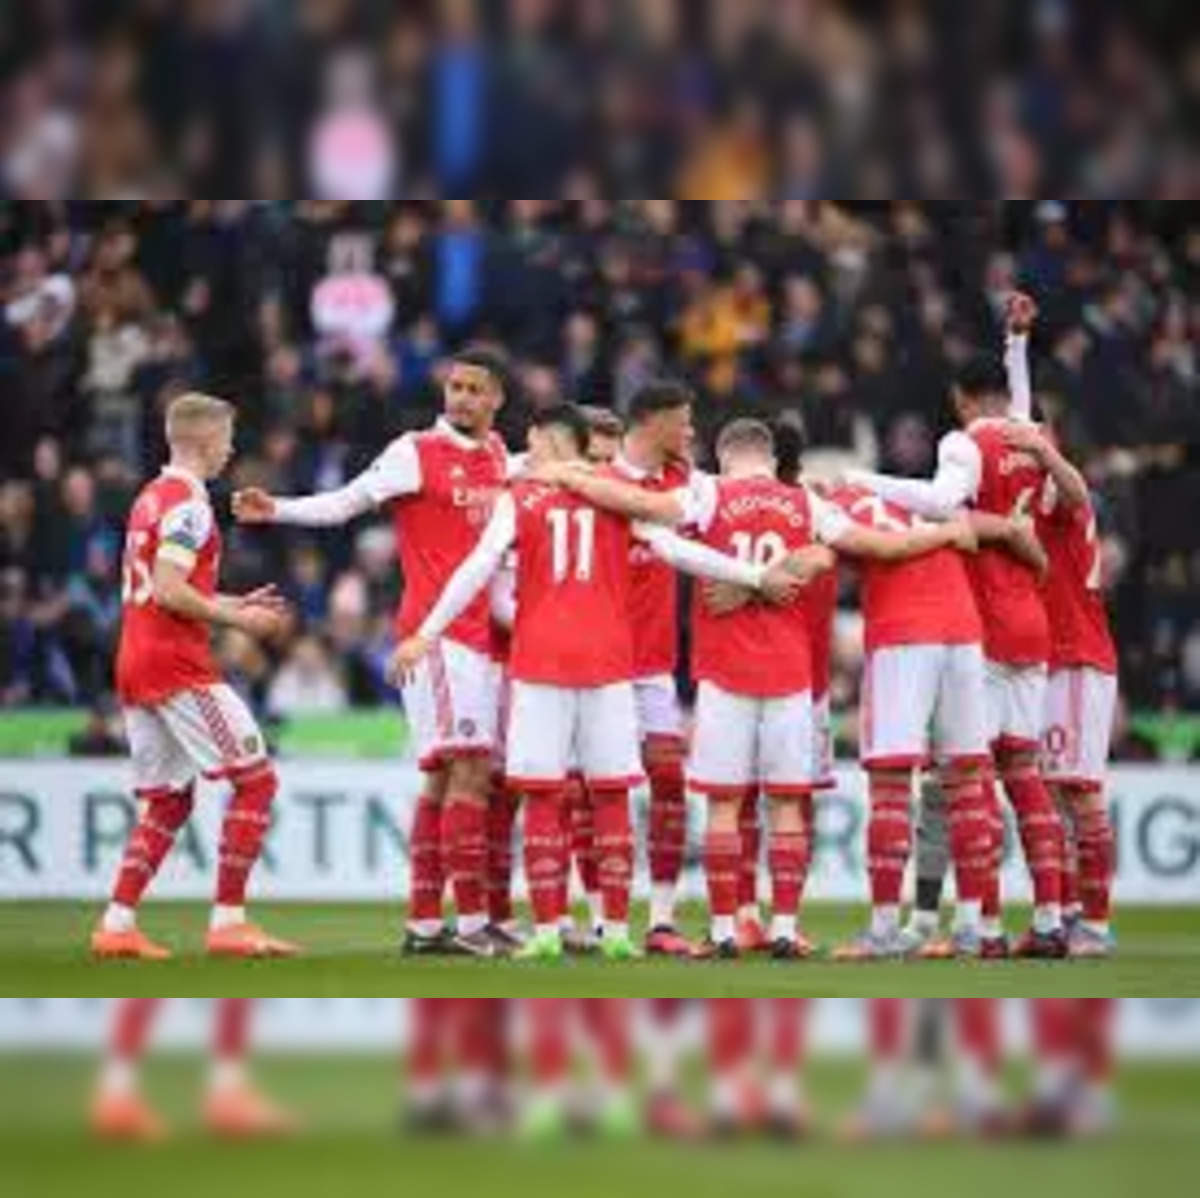 Premier League: Arsenal vs Everton Live Streaming in India - Schedule,  Match Details, Lineup - myKhel